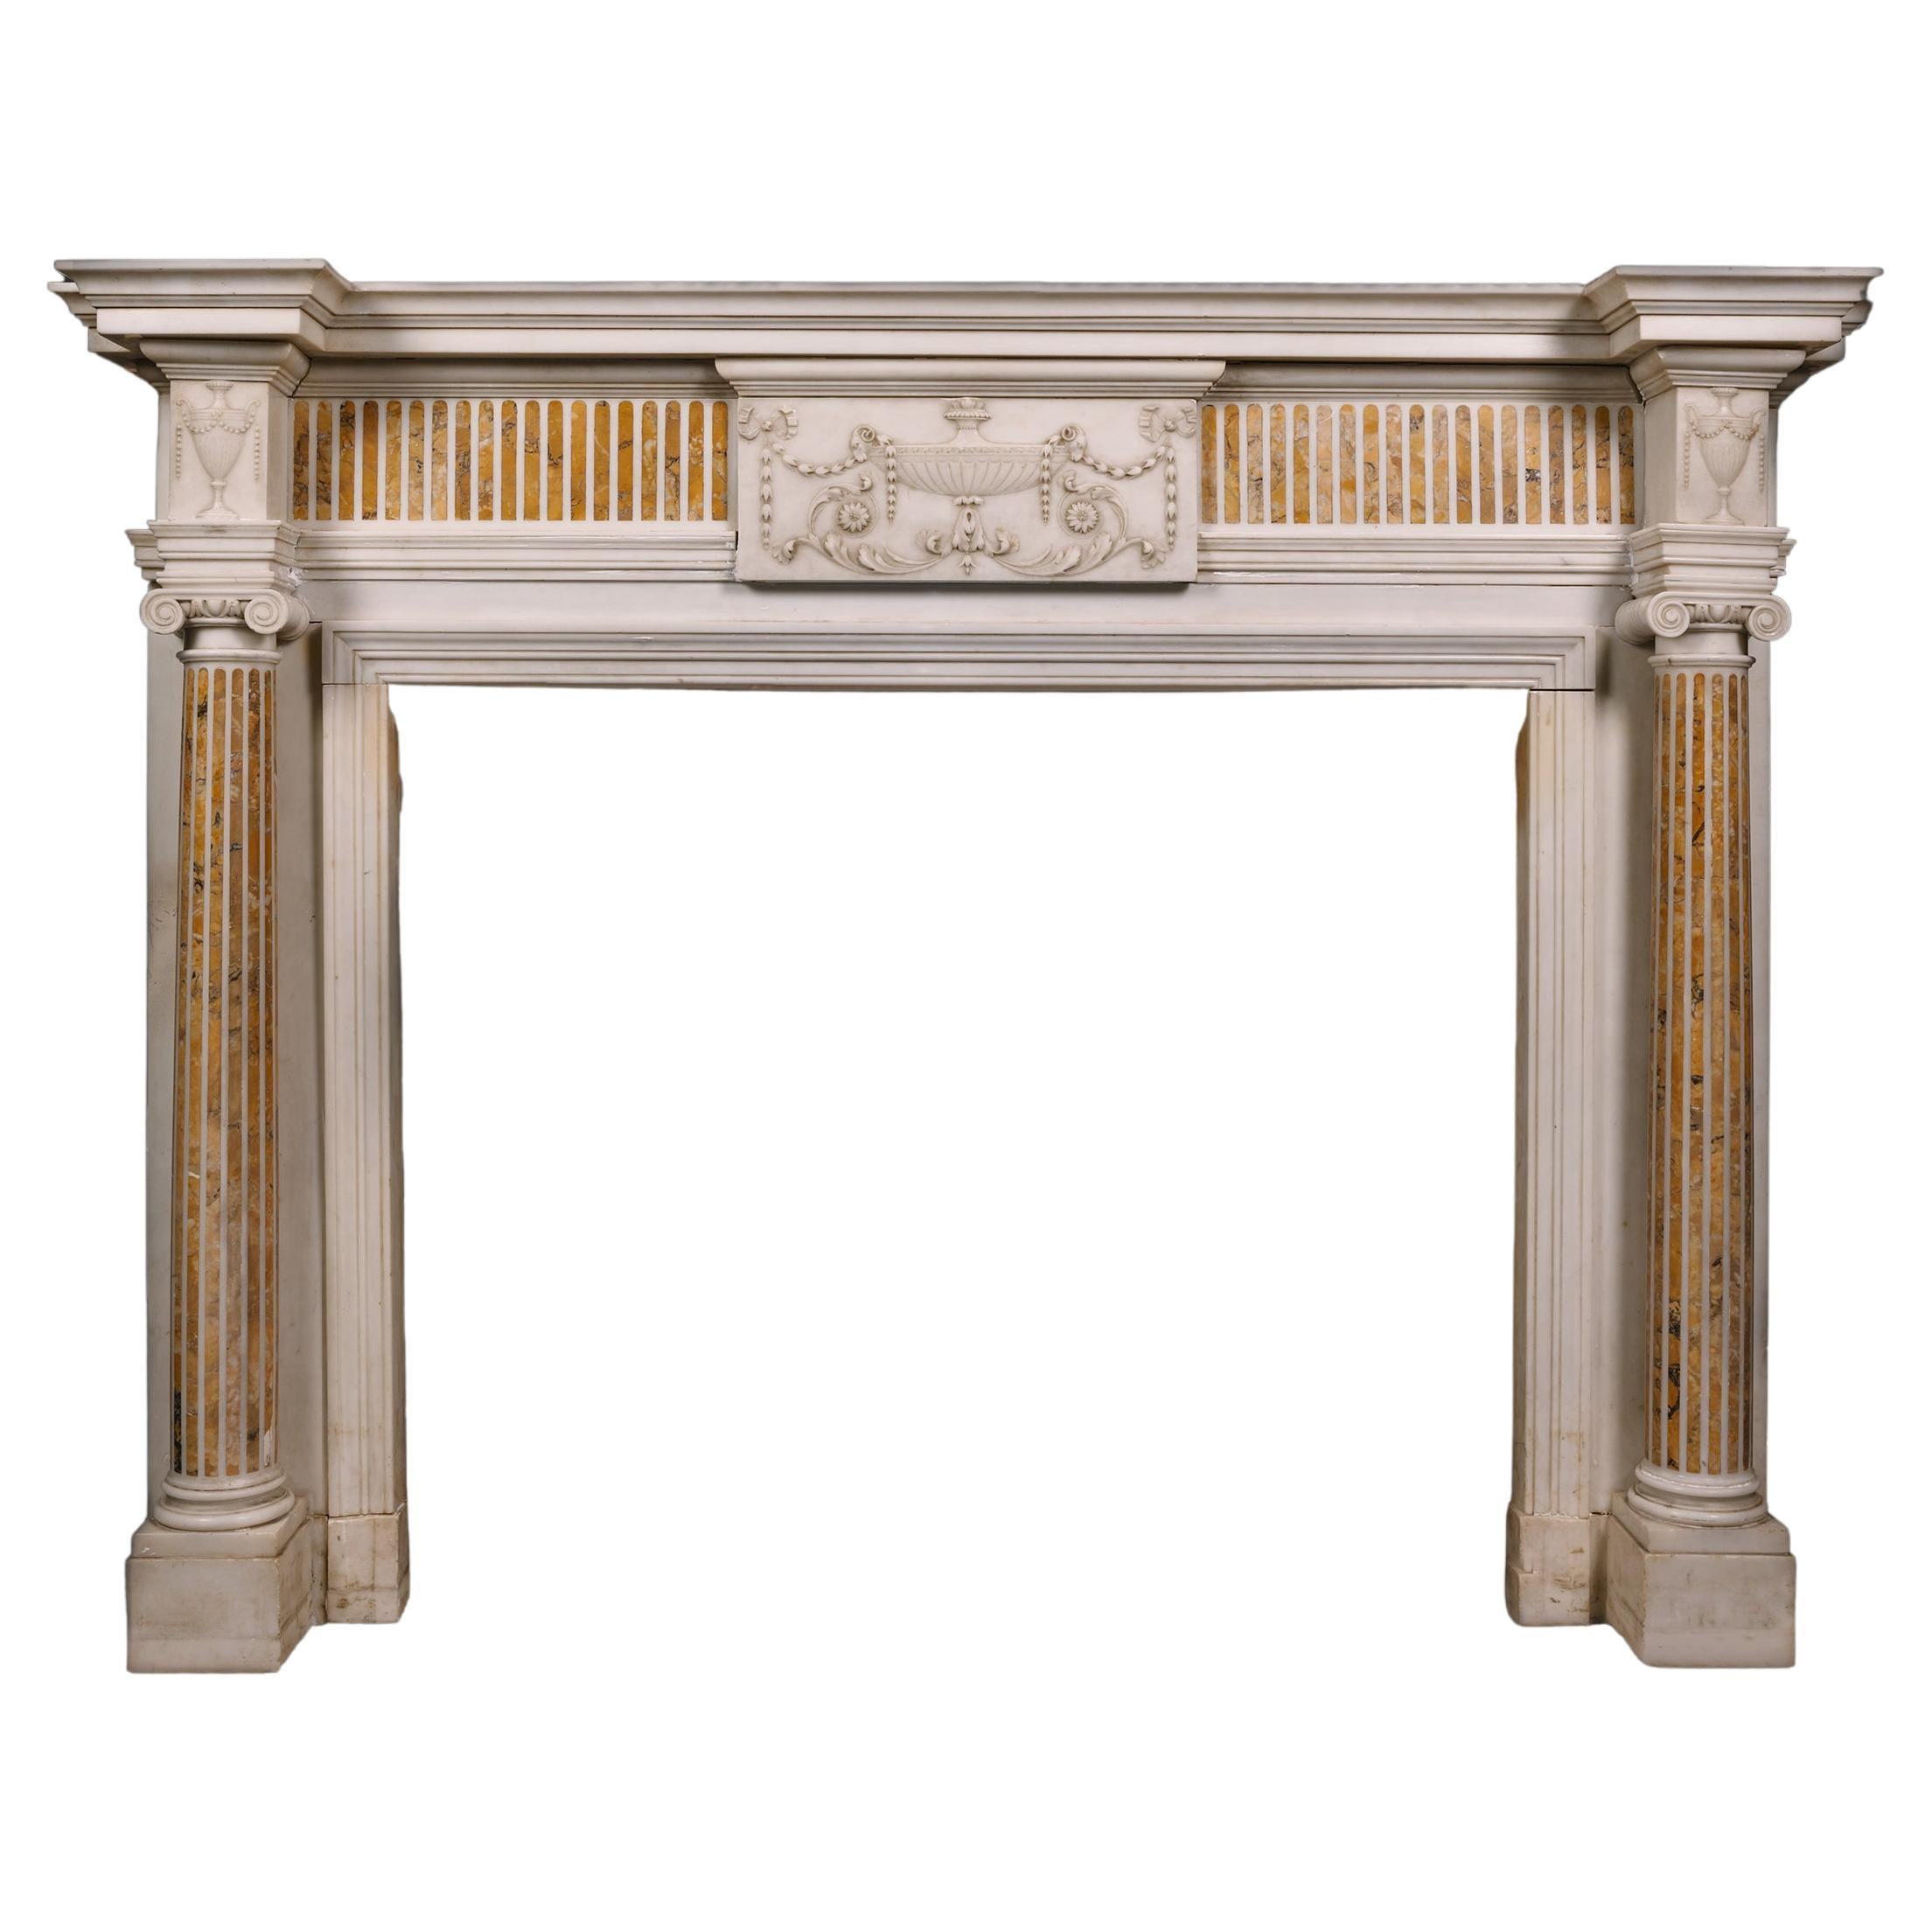 George III Period Carrara Marble and Sienna Marble Chimney Piece For Sale